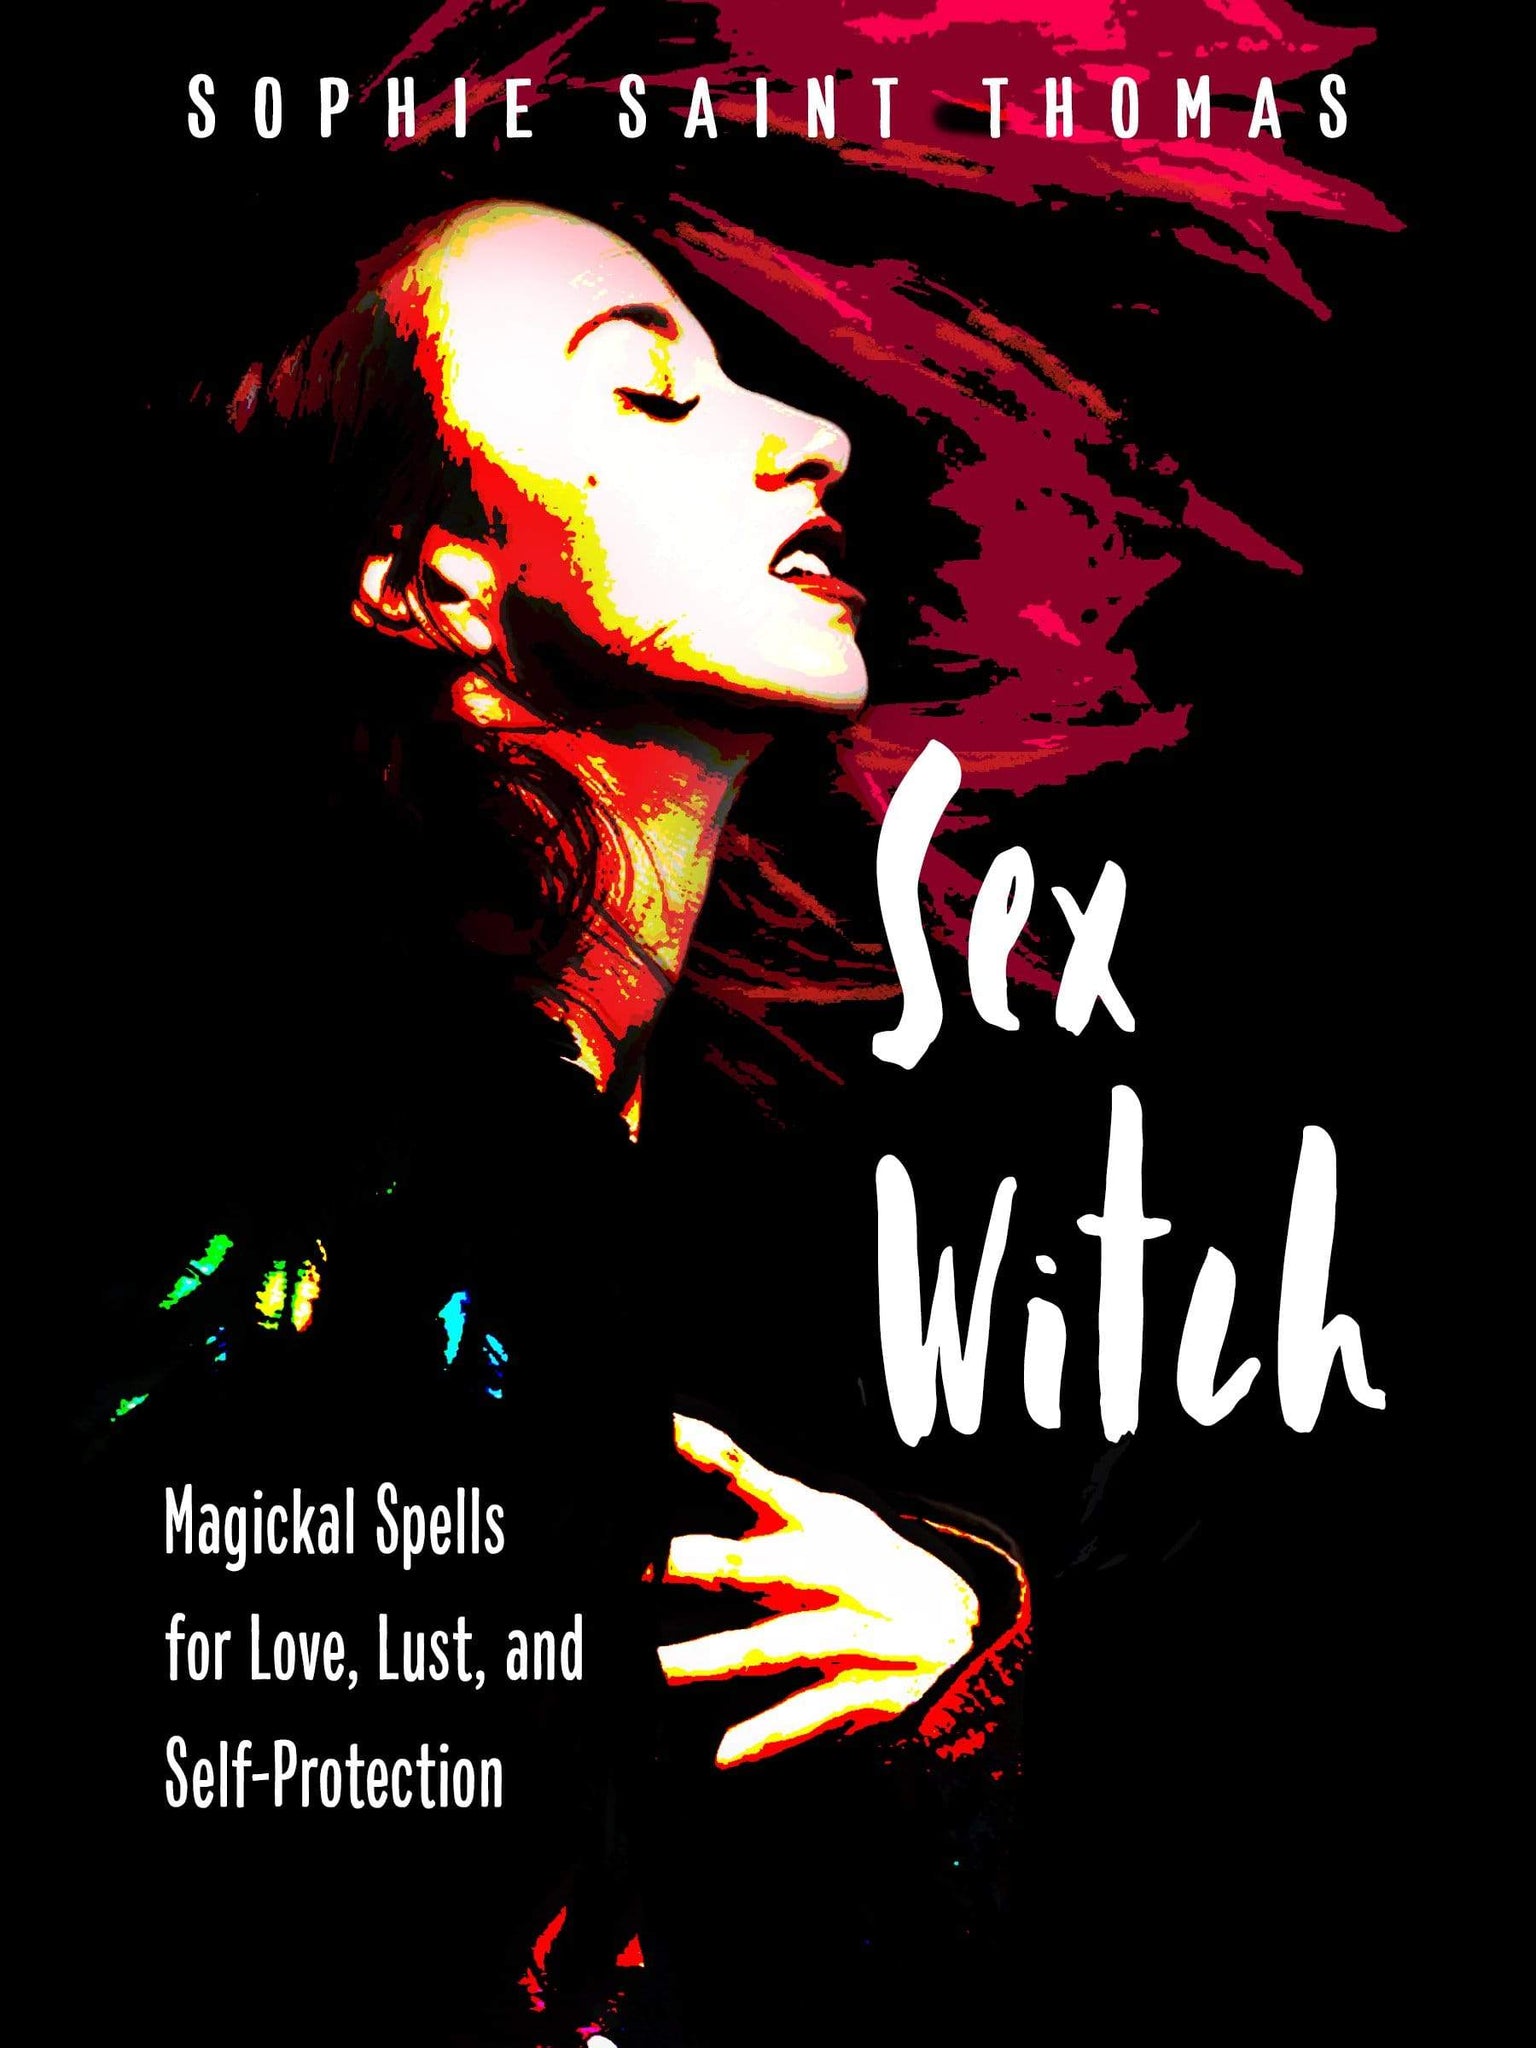 Sex Witch - Magickal Spells for Love, Lust, and Self-Protection by Sophie Saint Thomas